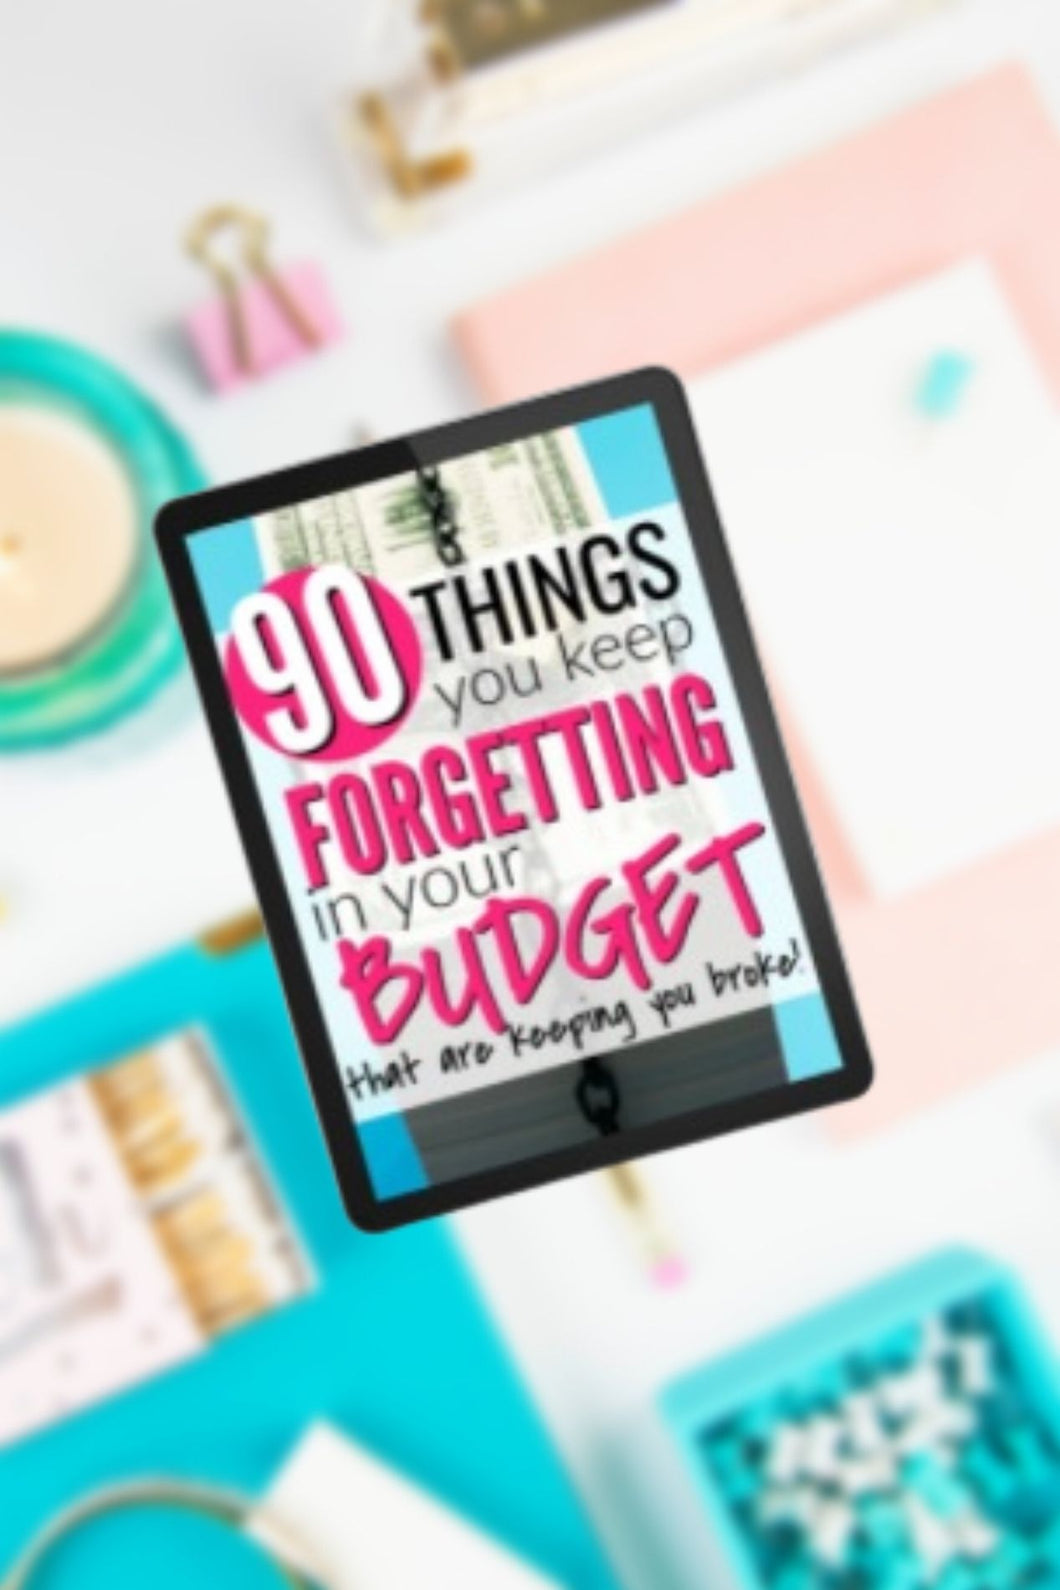 90+ Budget Categories That You're Forgetting About